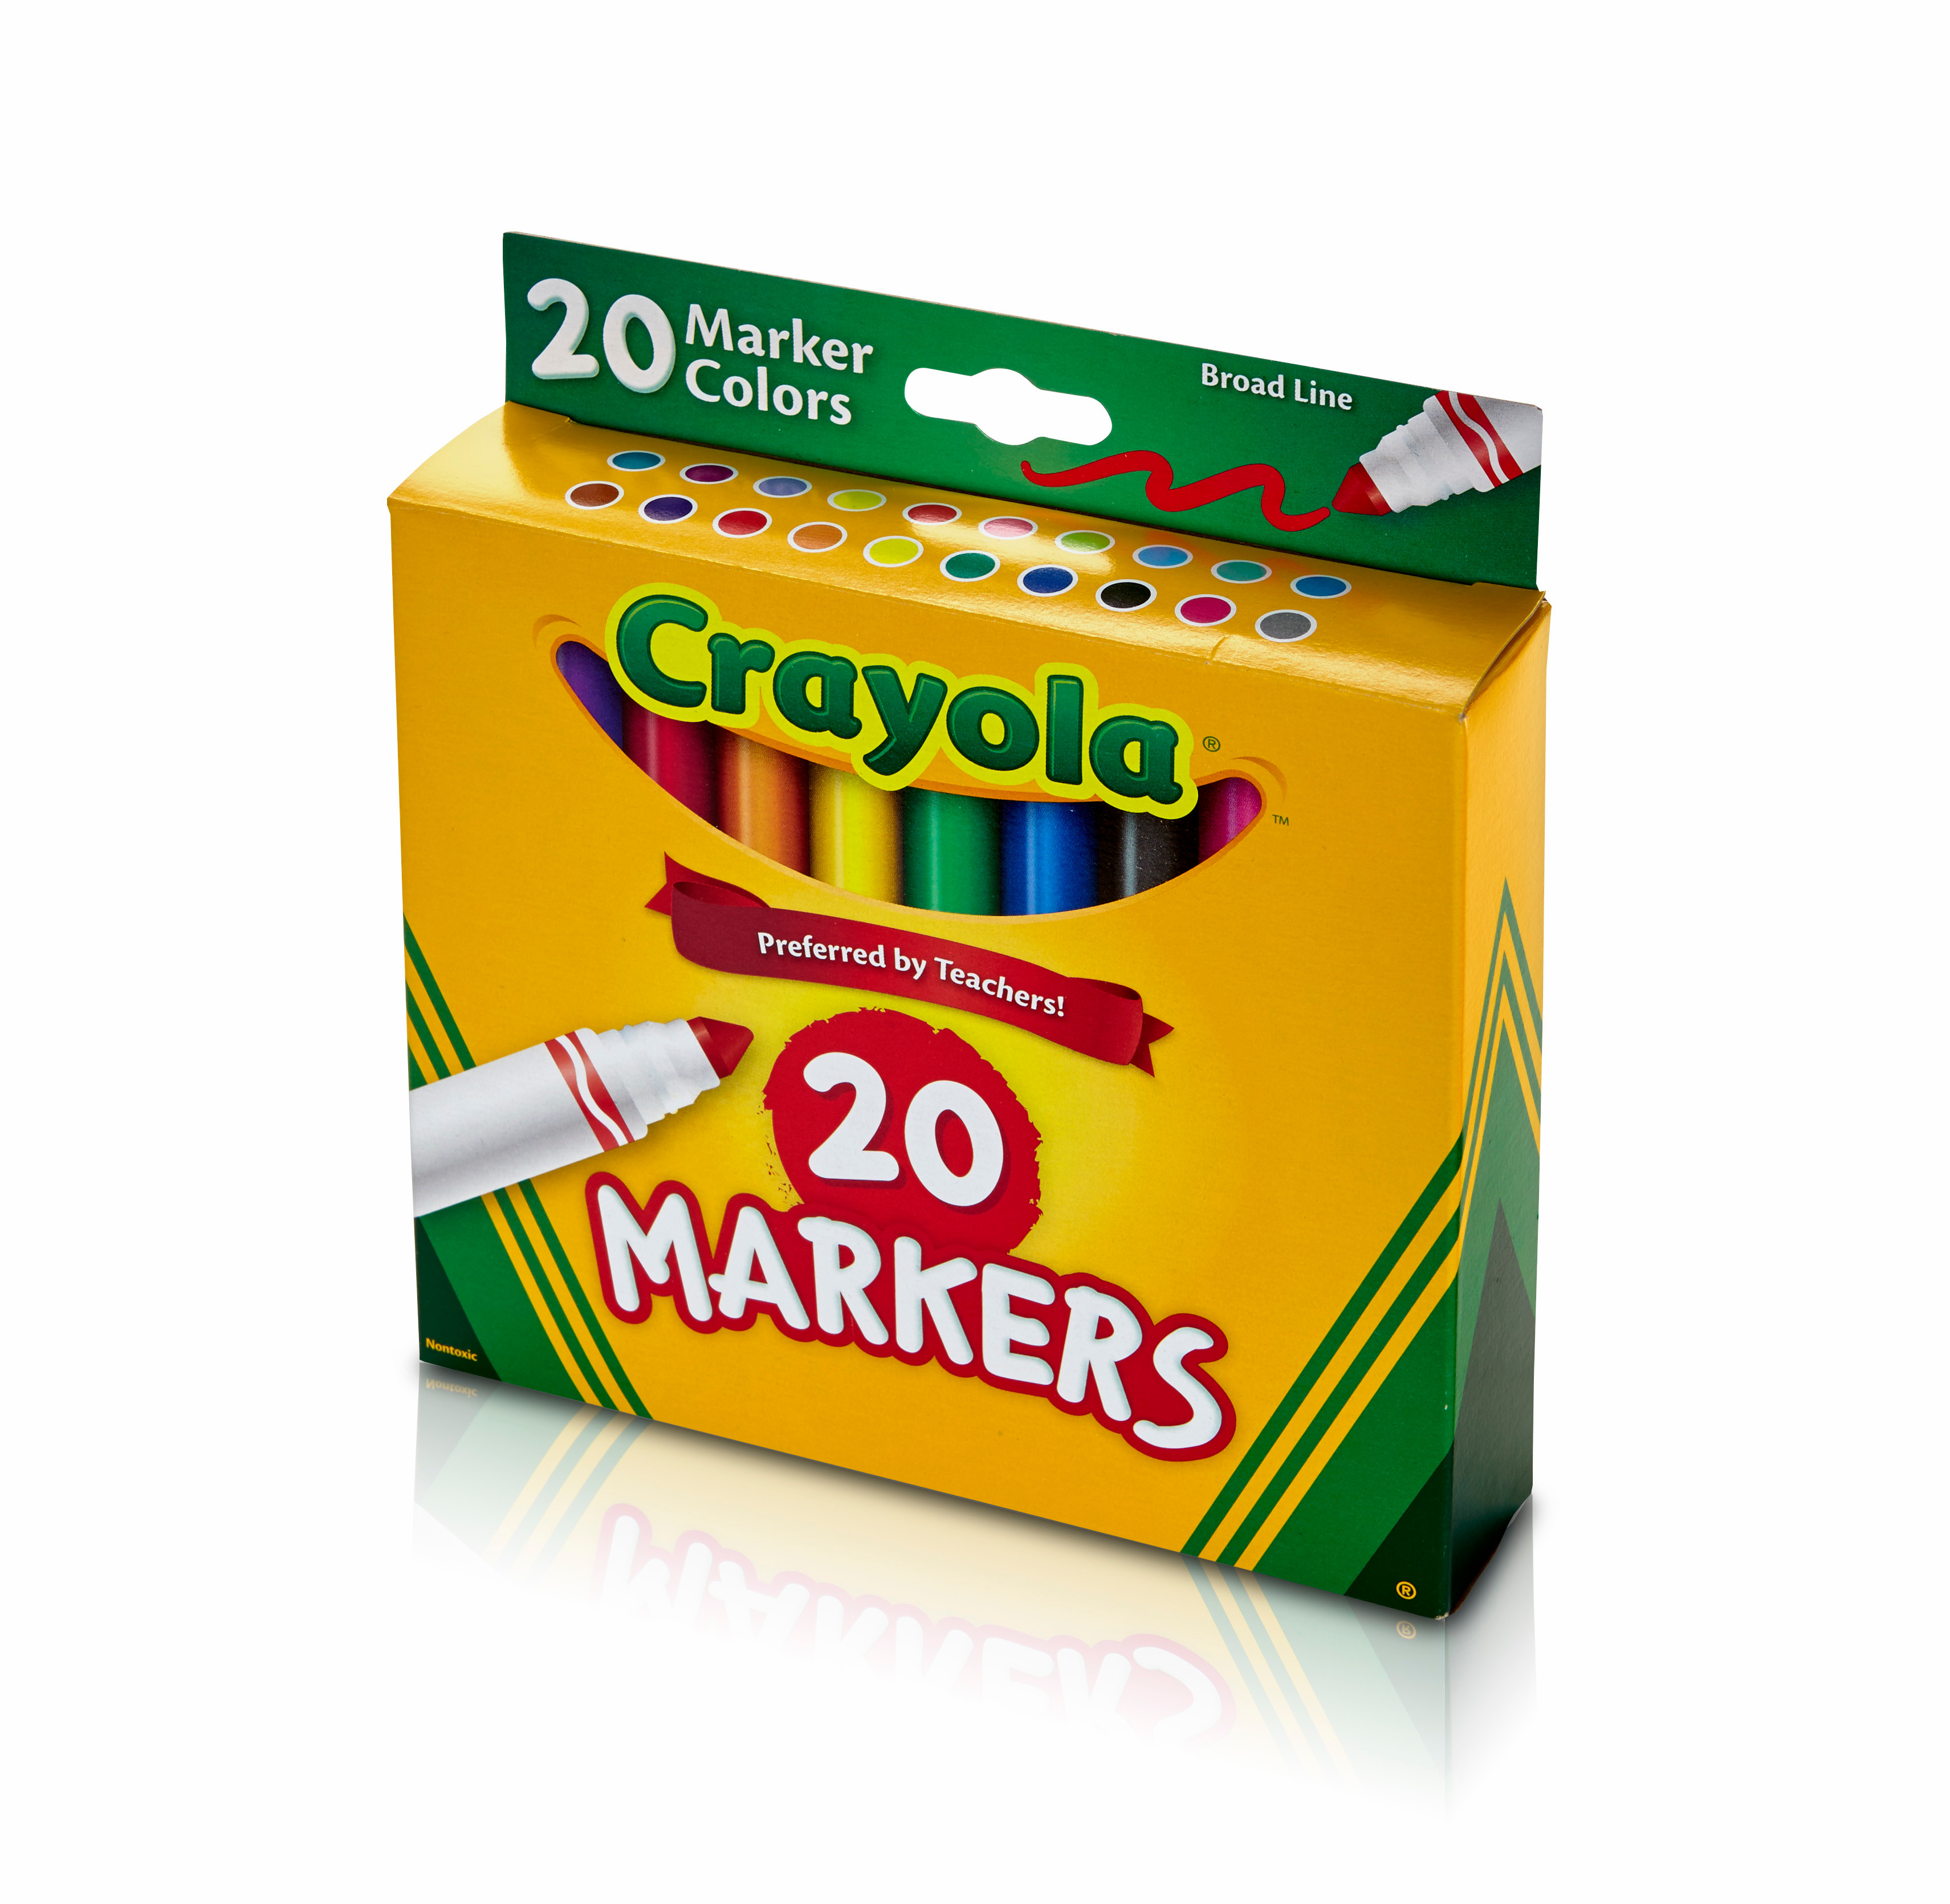 Crayola Broad Line Markers, 20 Ct, School Supplies, Easter Basket Stuffers, Classic Colors, Child - image 6 of 8